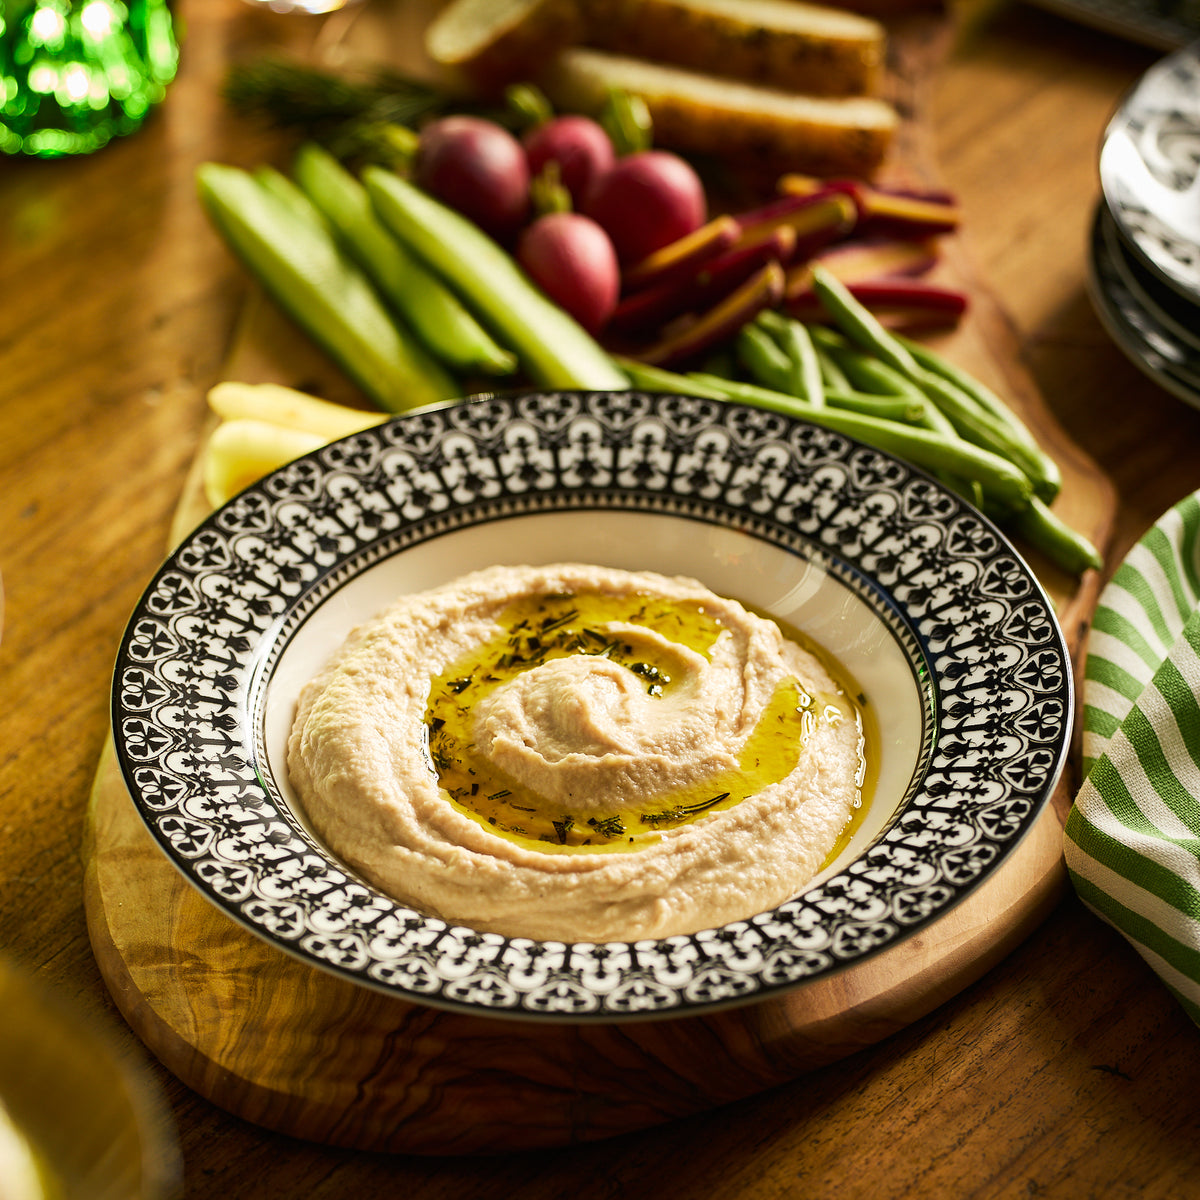 A bowl of hummus garnished with olive oil and herbs, presented in a classic Casablanca Rimmed Soup Bowl by Caskata Artisanal Home, surrounded by sliced bread, cucumber, radishes, green beans, and bell pepper on a wooden board.